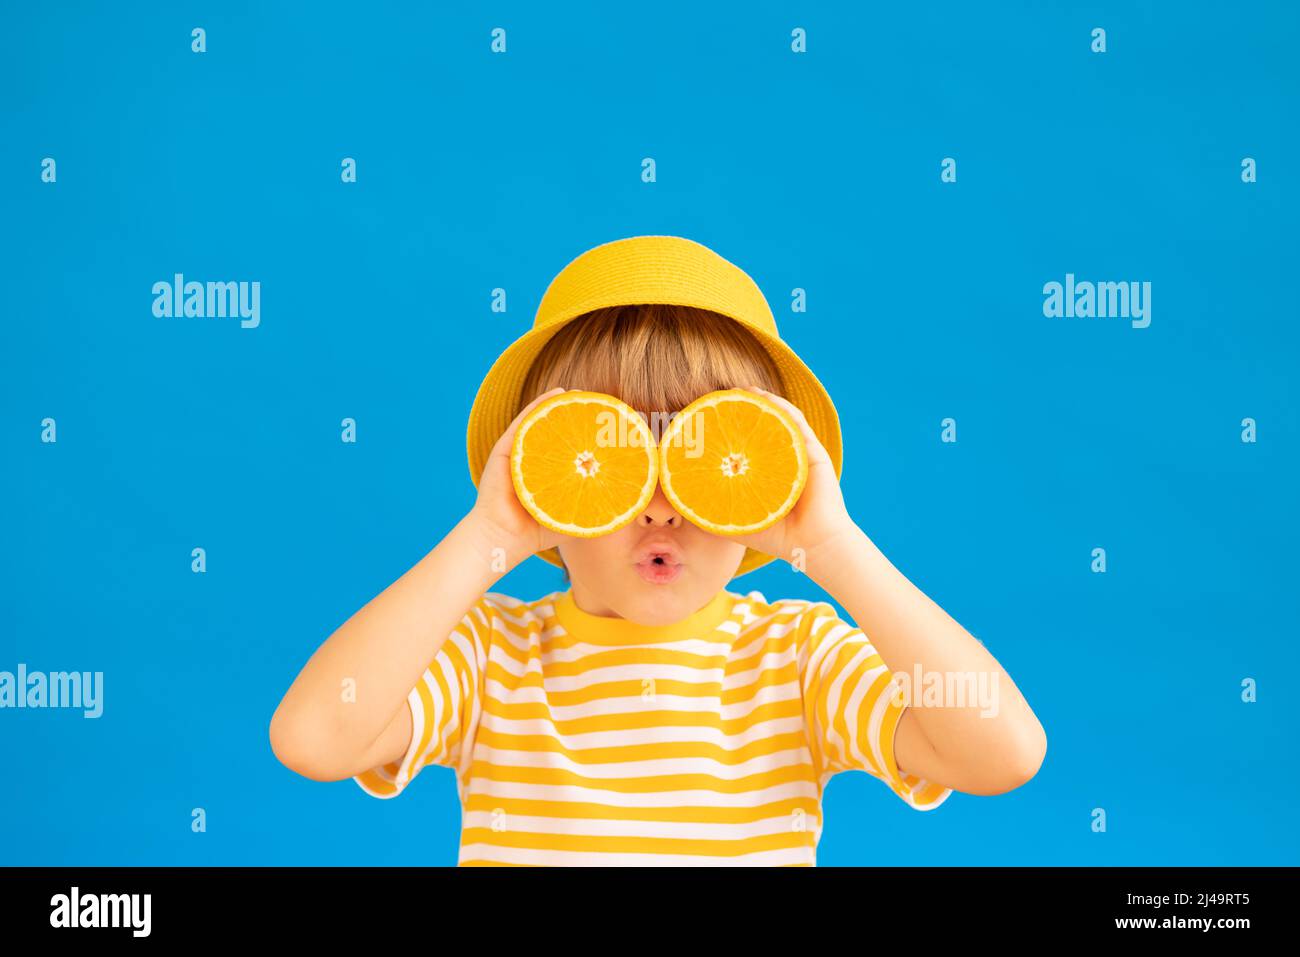 Surprized child holding slices of orange fruit like sunglasses. Kid wearing striped yellow t-shirt against blue paper background. Healthy eating and s Stock Photo